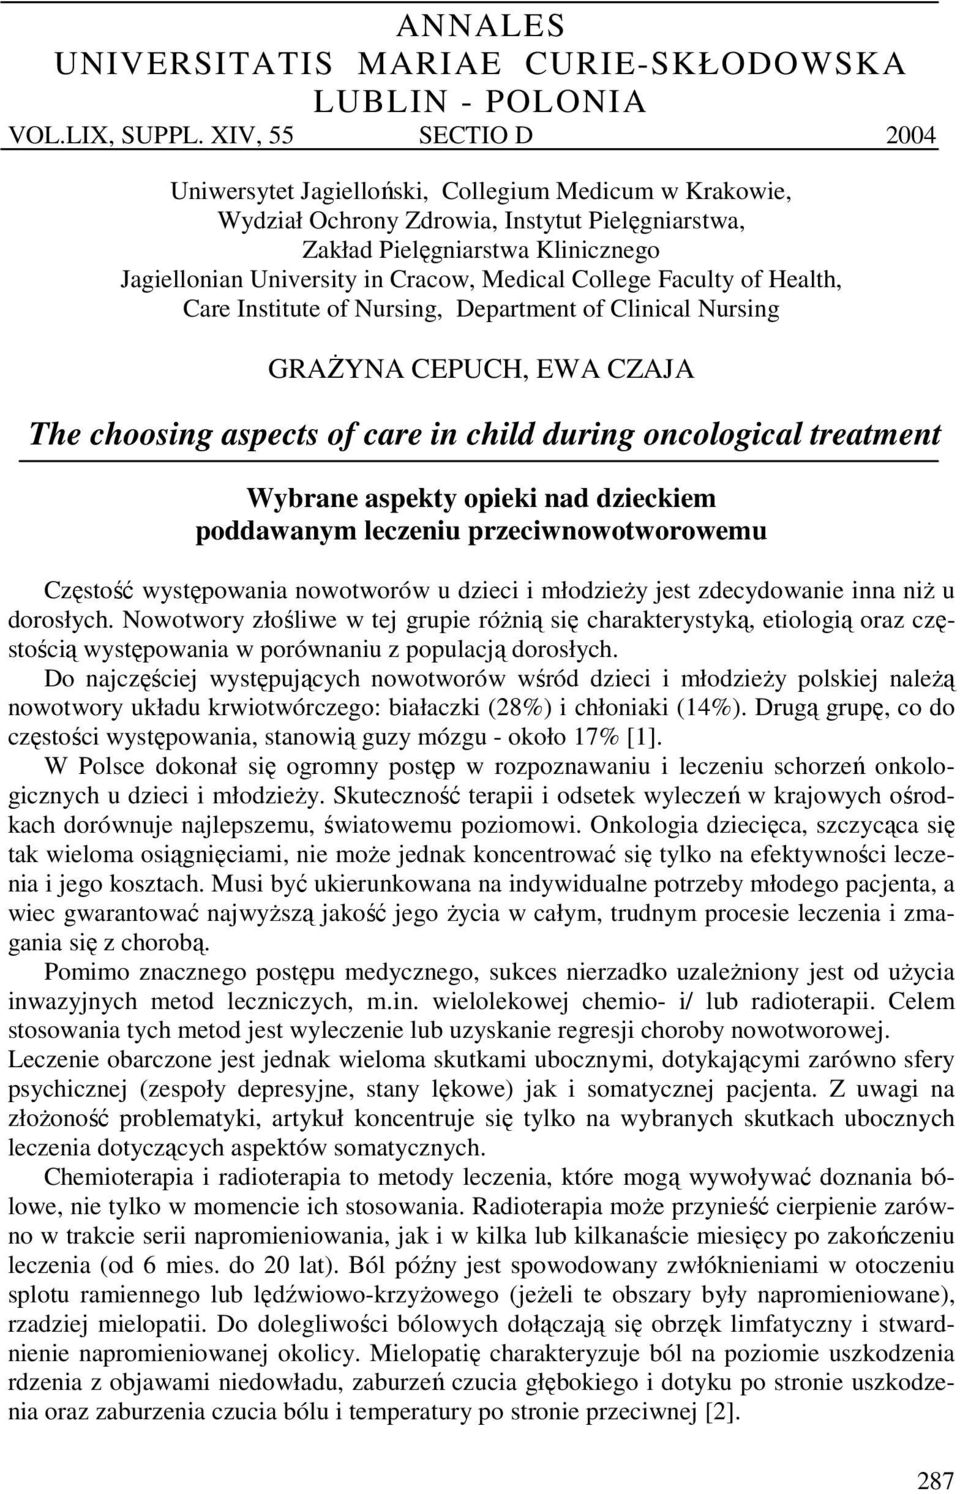 Medical College Faculty of Health, Care Institute of Nursing, Department of Clinical Nursing GRAŻYNA CEPUCH, EWA CZAJA The choosing aspects of care in child during oncological treatment Wybrane